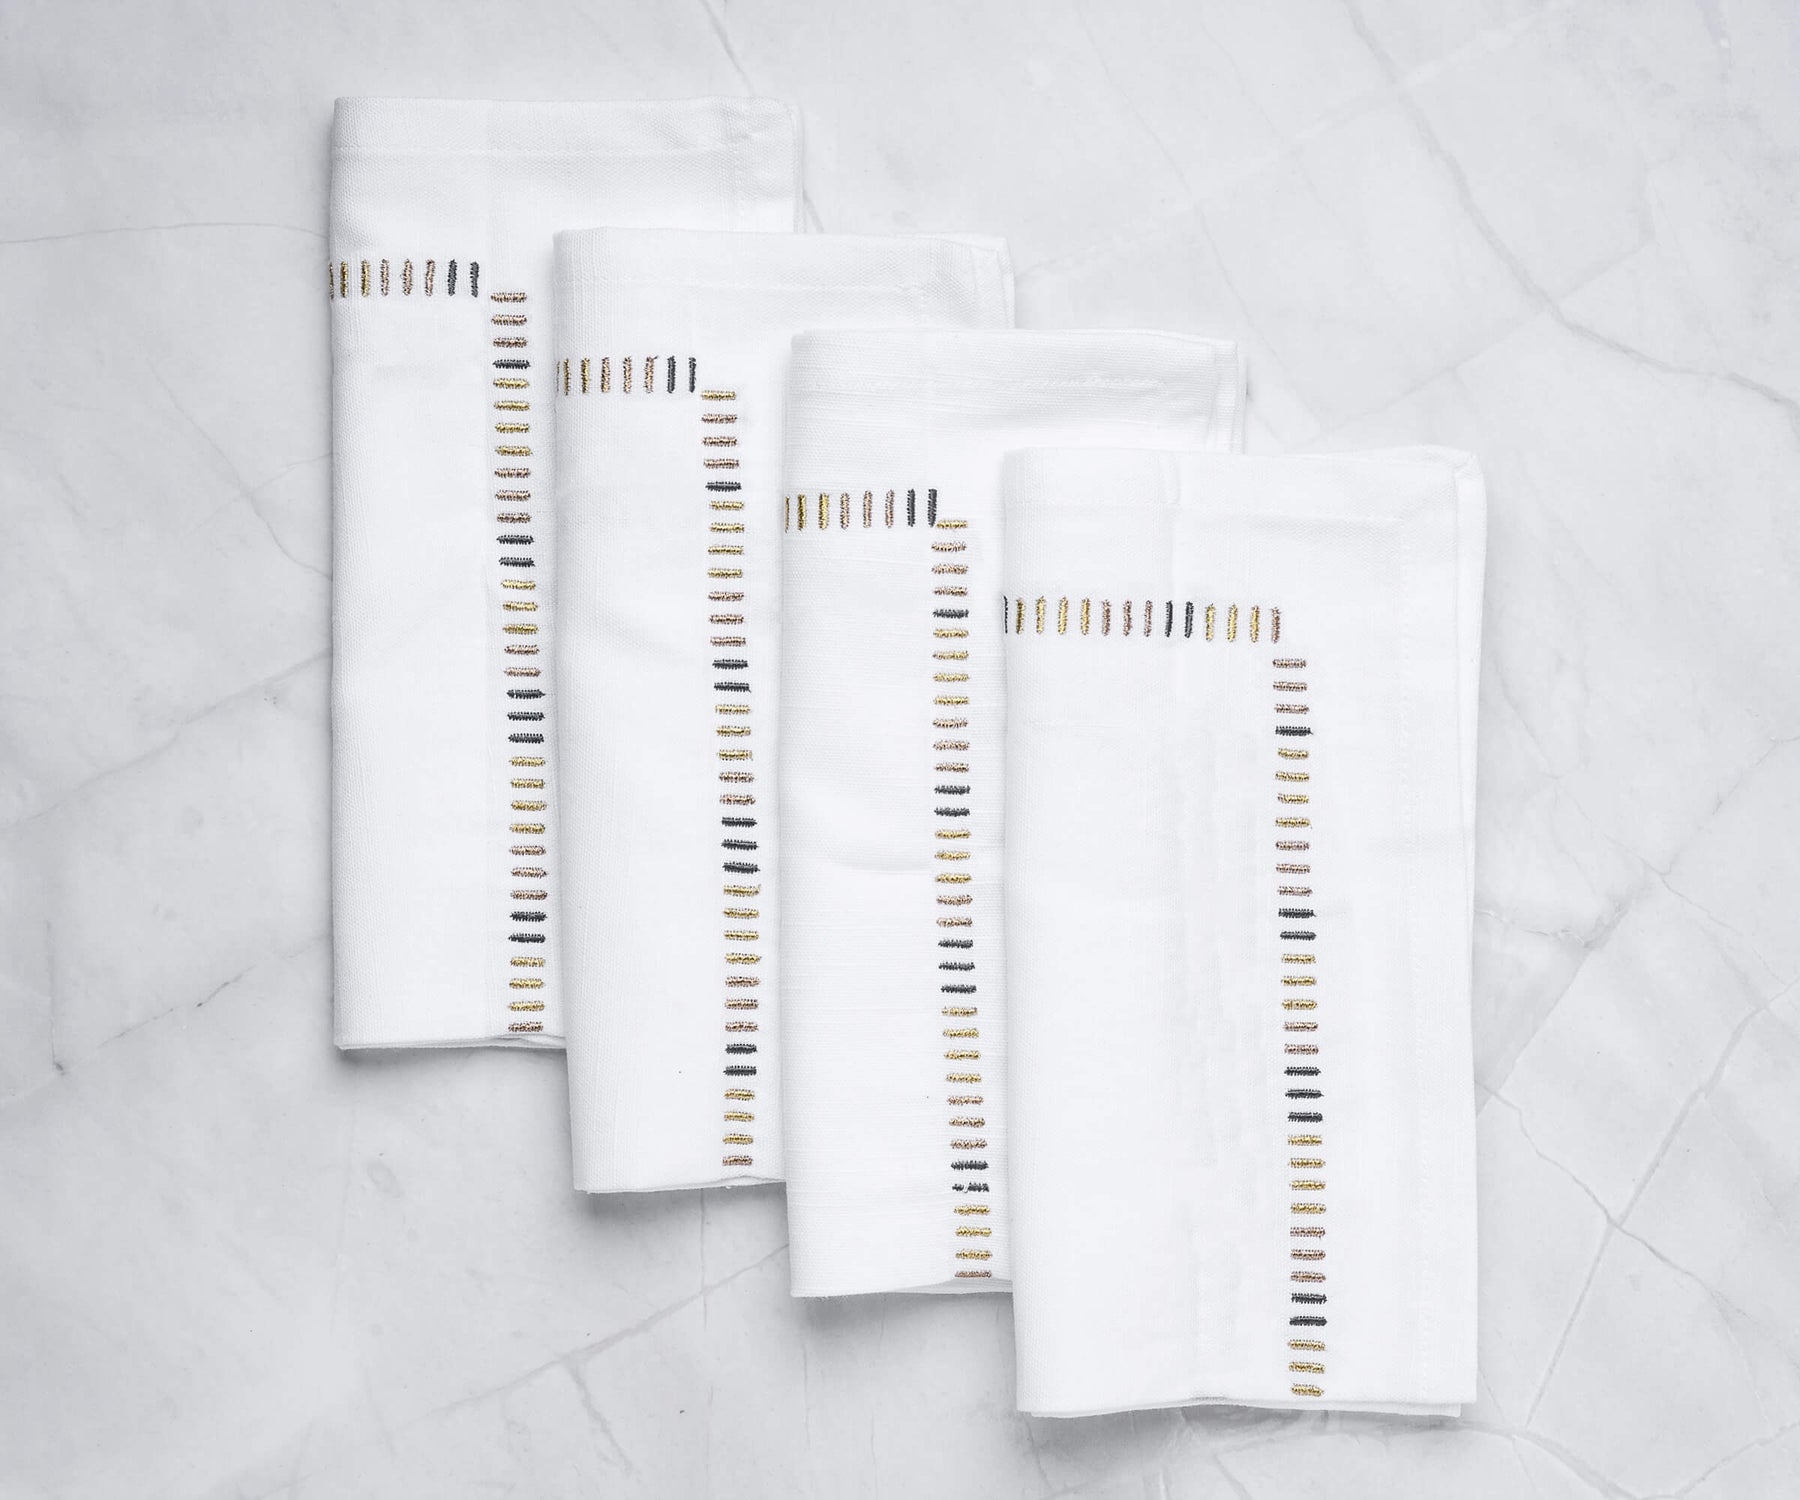 Choose from a variety of napkins suitable for embroidery, linen napkins, blank napkins, embroidery blanks on linen napkins, and napkins with embroidery designs.